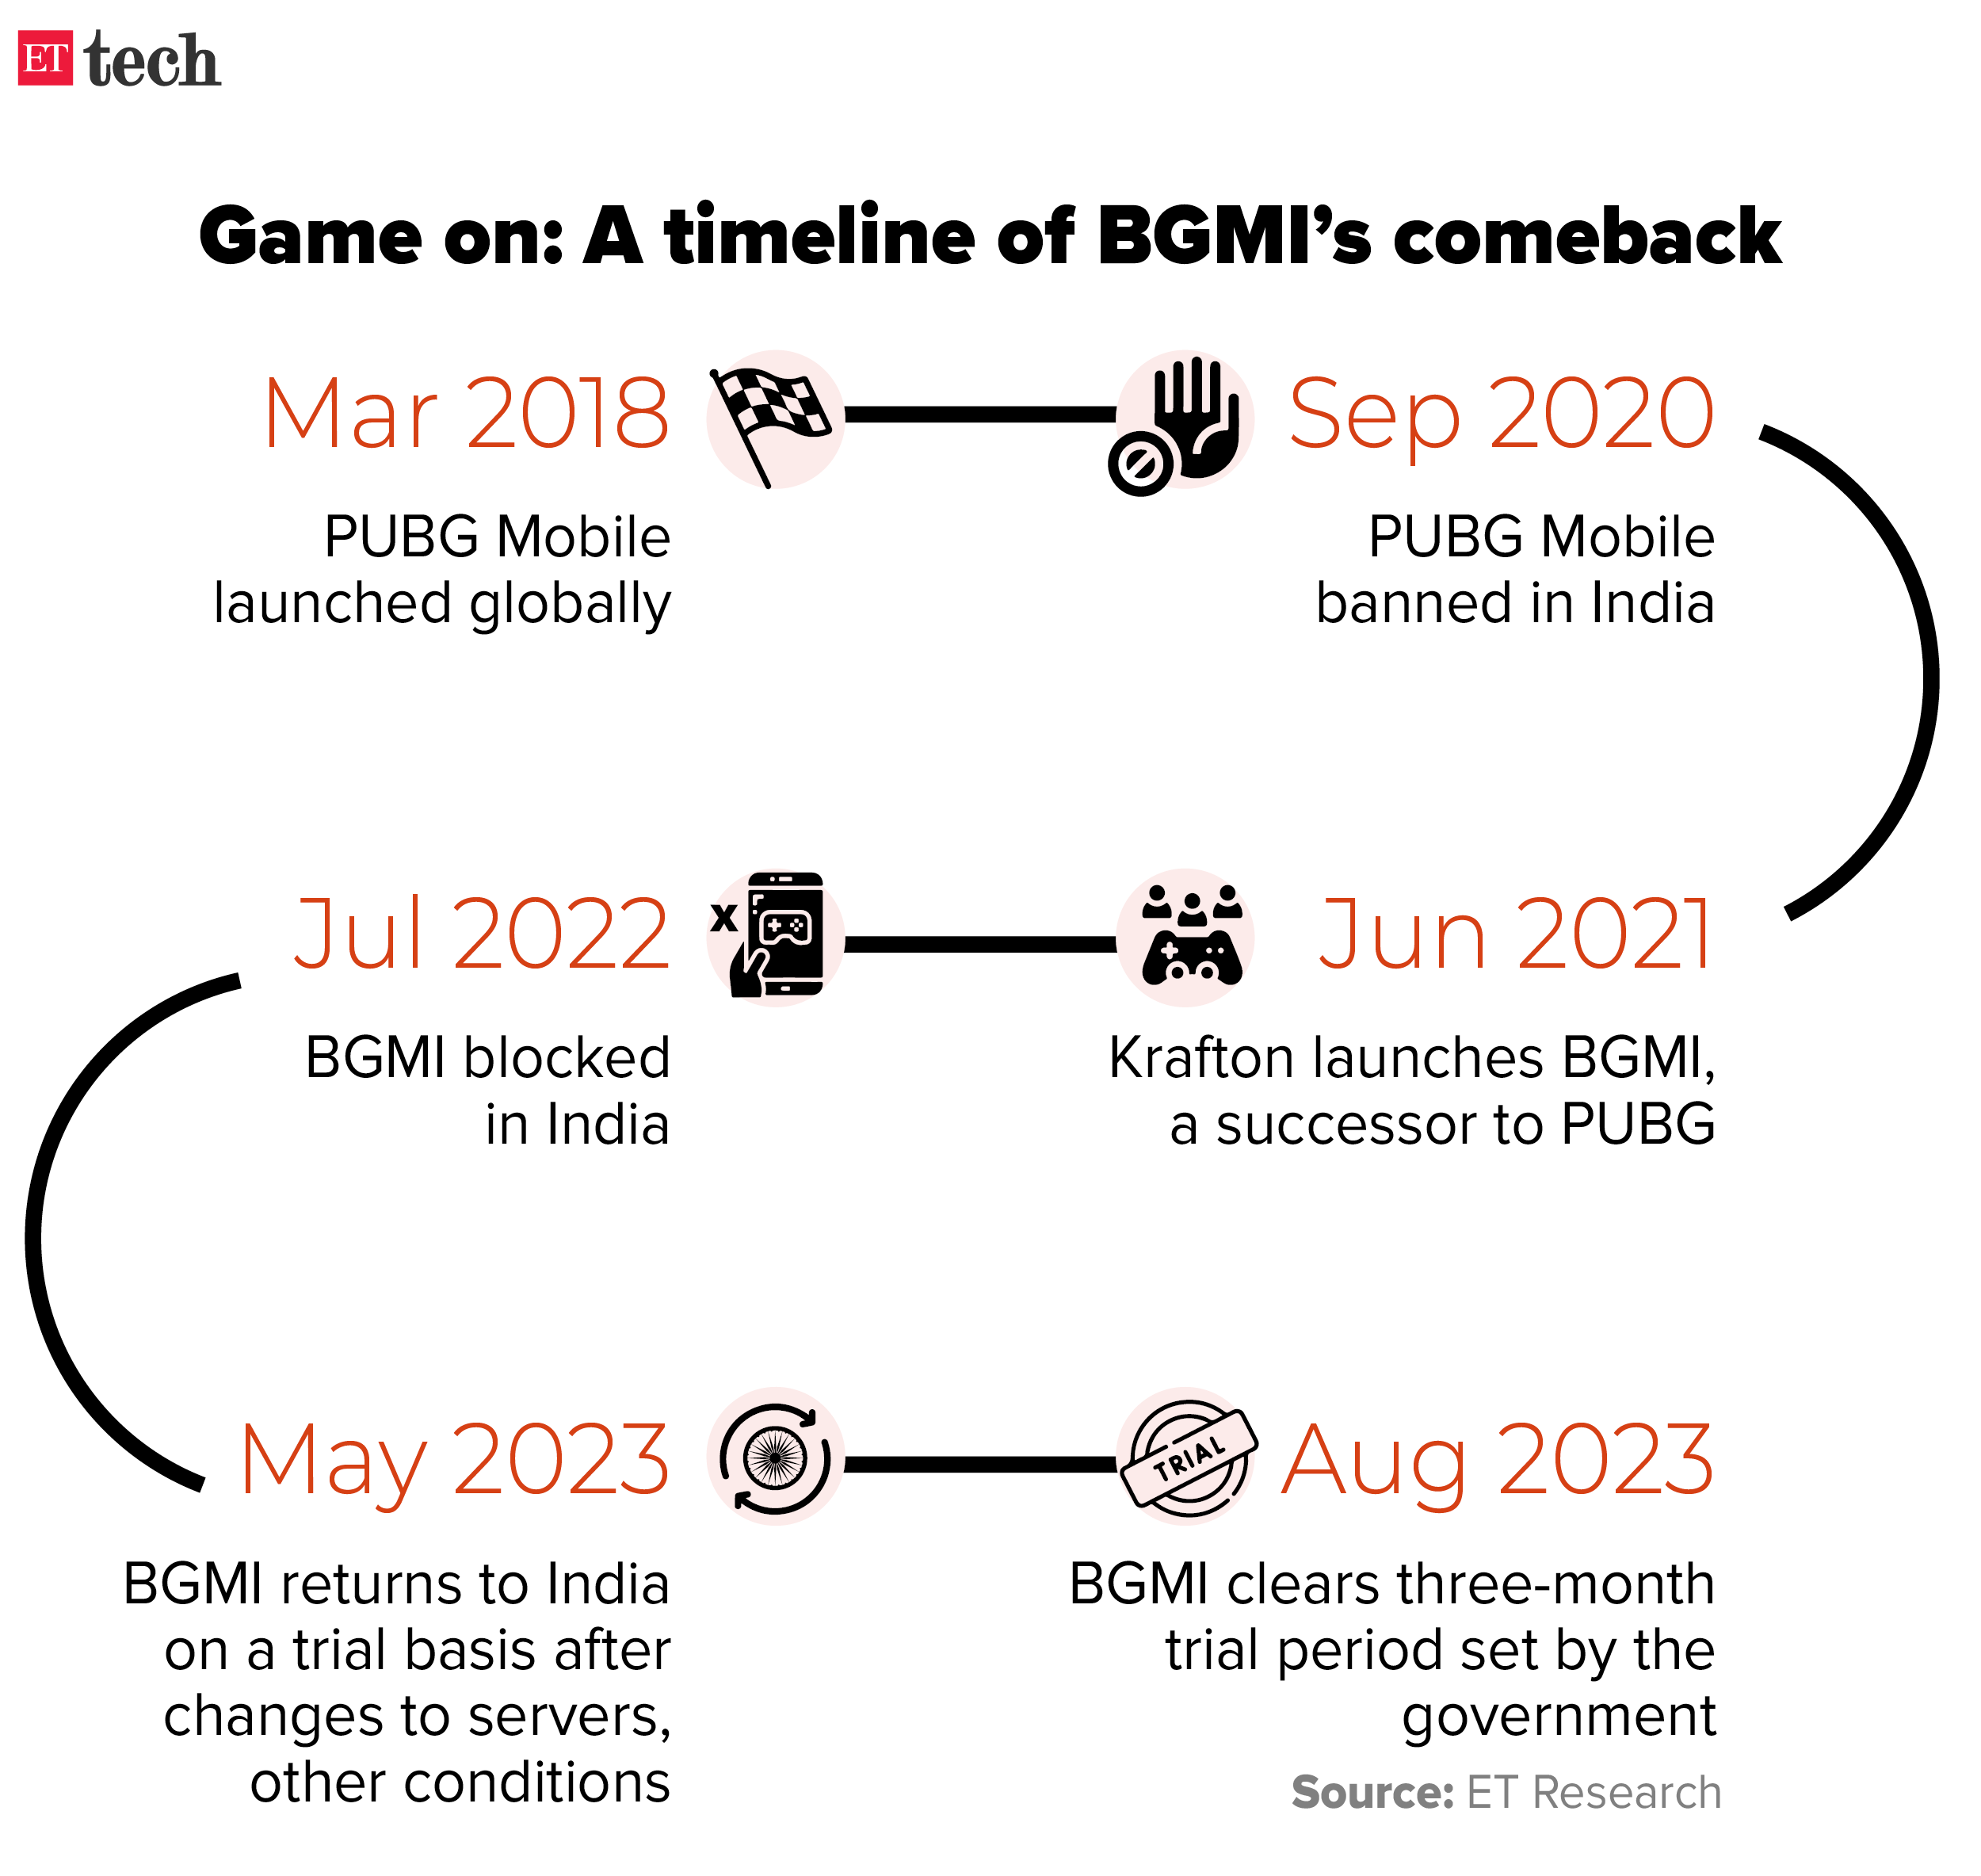 Game on A timeline of BGMI comeback ETTECH